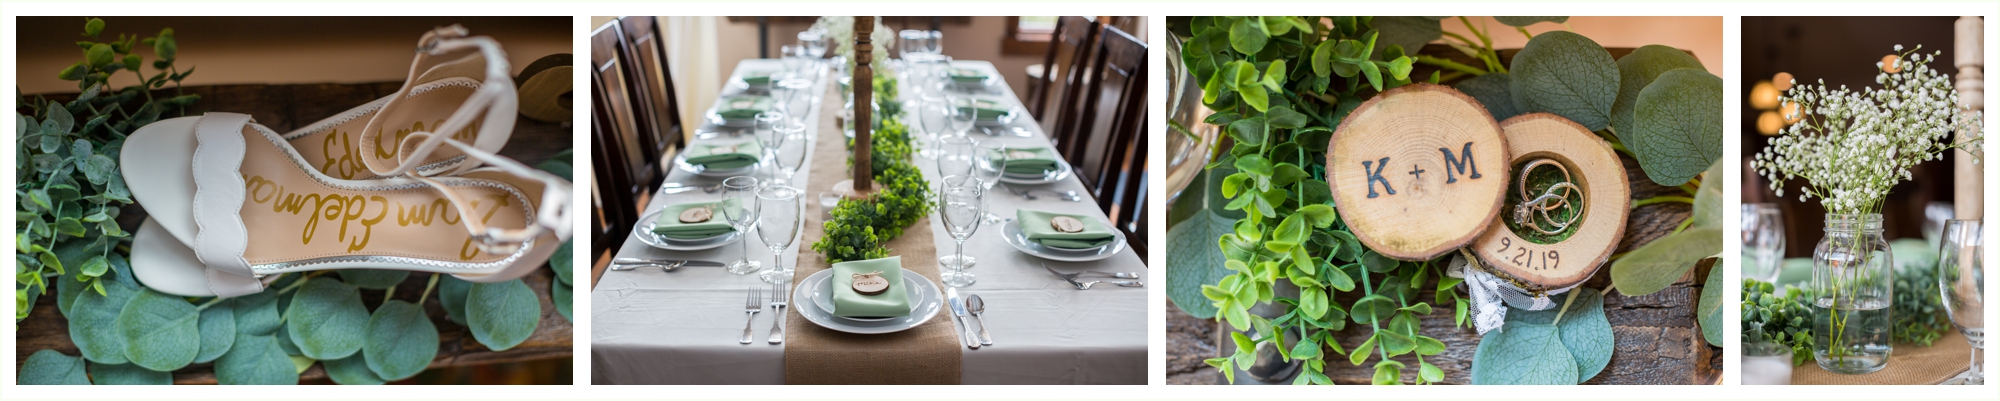 private cabin wedding reception details in breckenridge colorado for fall elopement beautiful greenery and florals